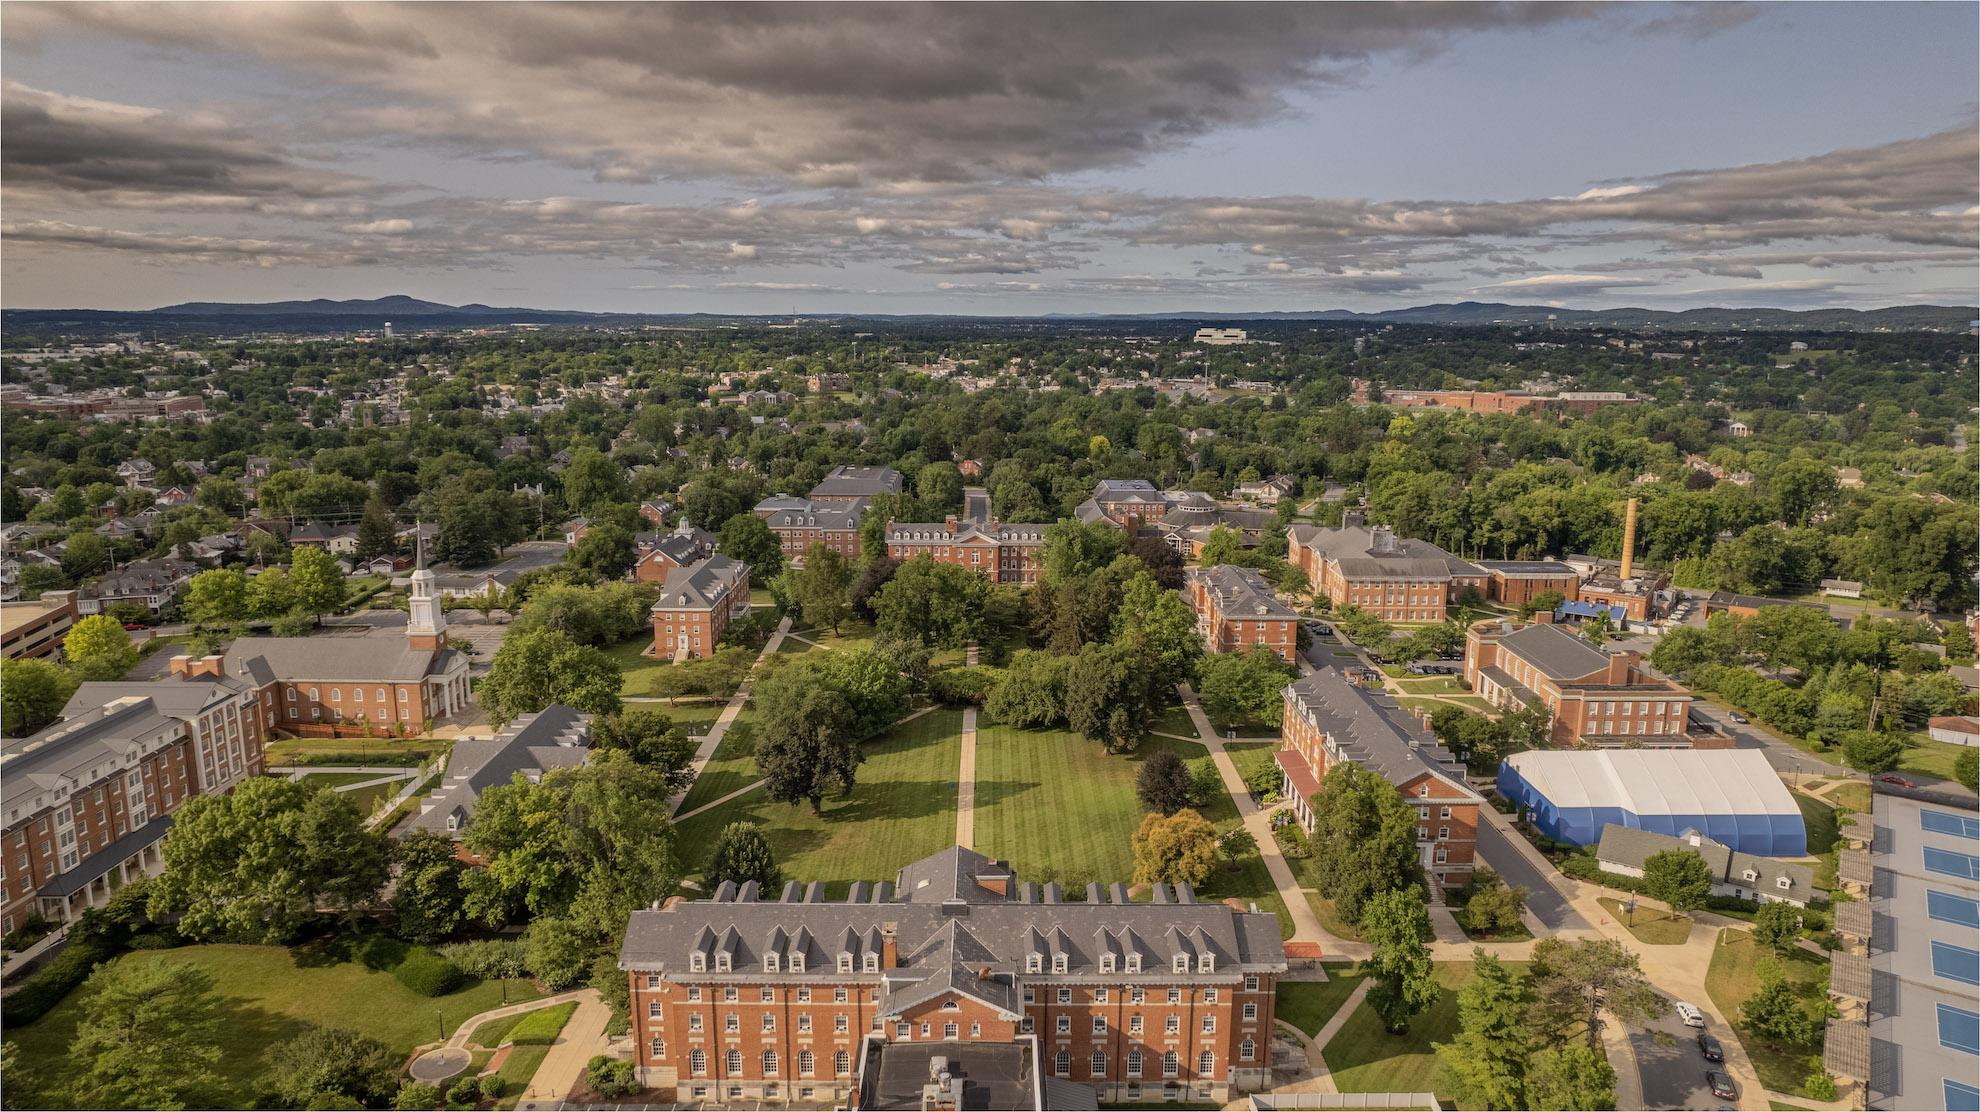 An aerial view of Hood's campus